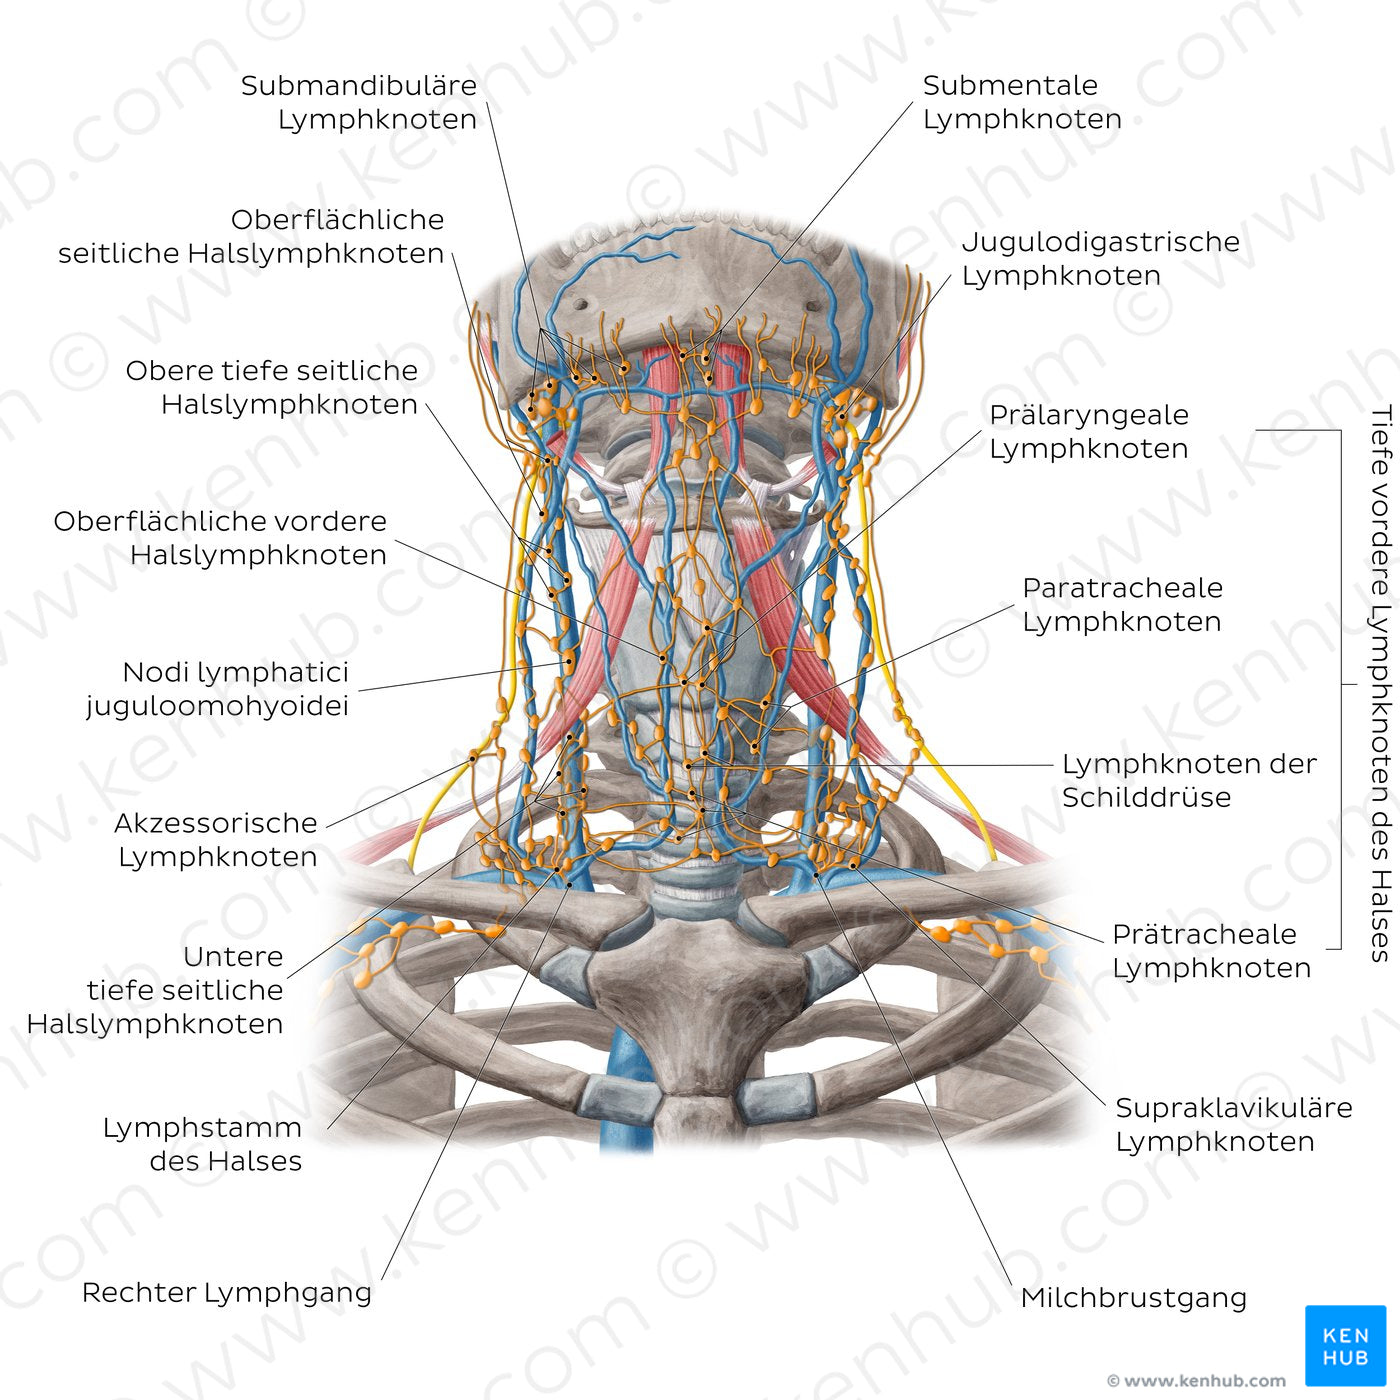 Lymphatics of the head and neck (Anterior) (German)